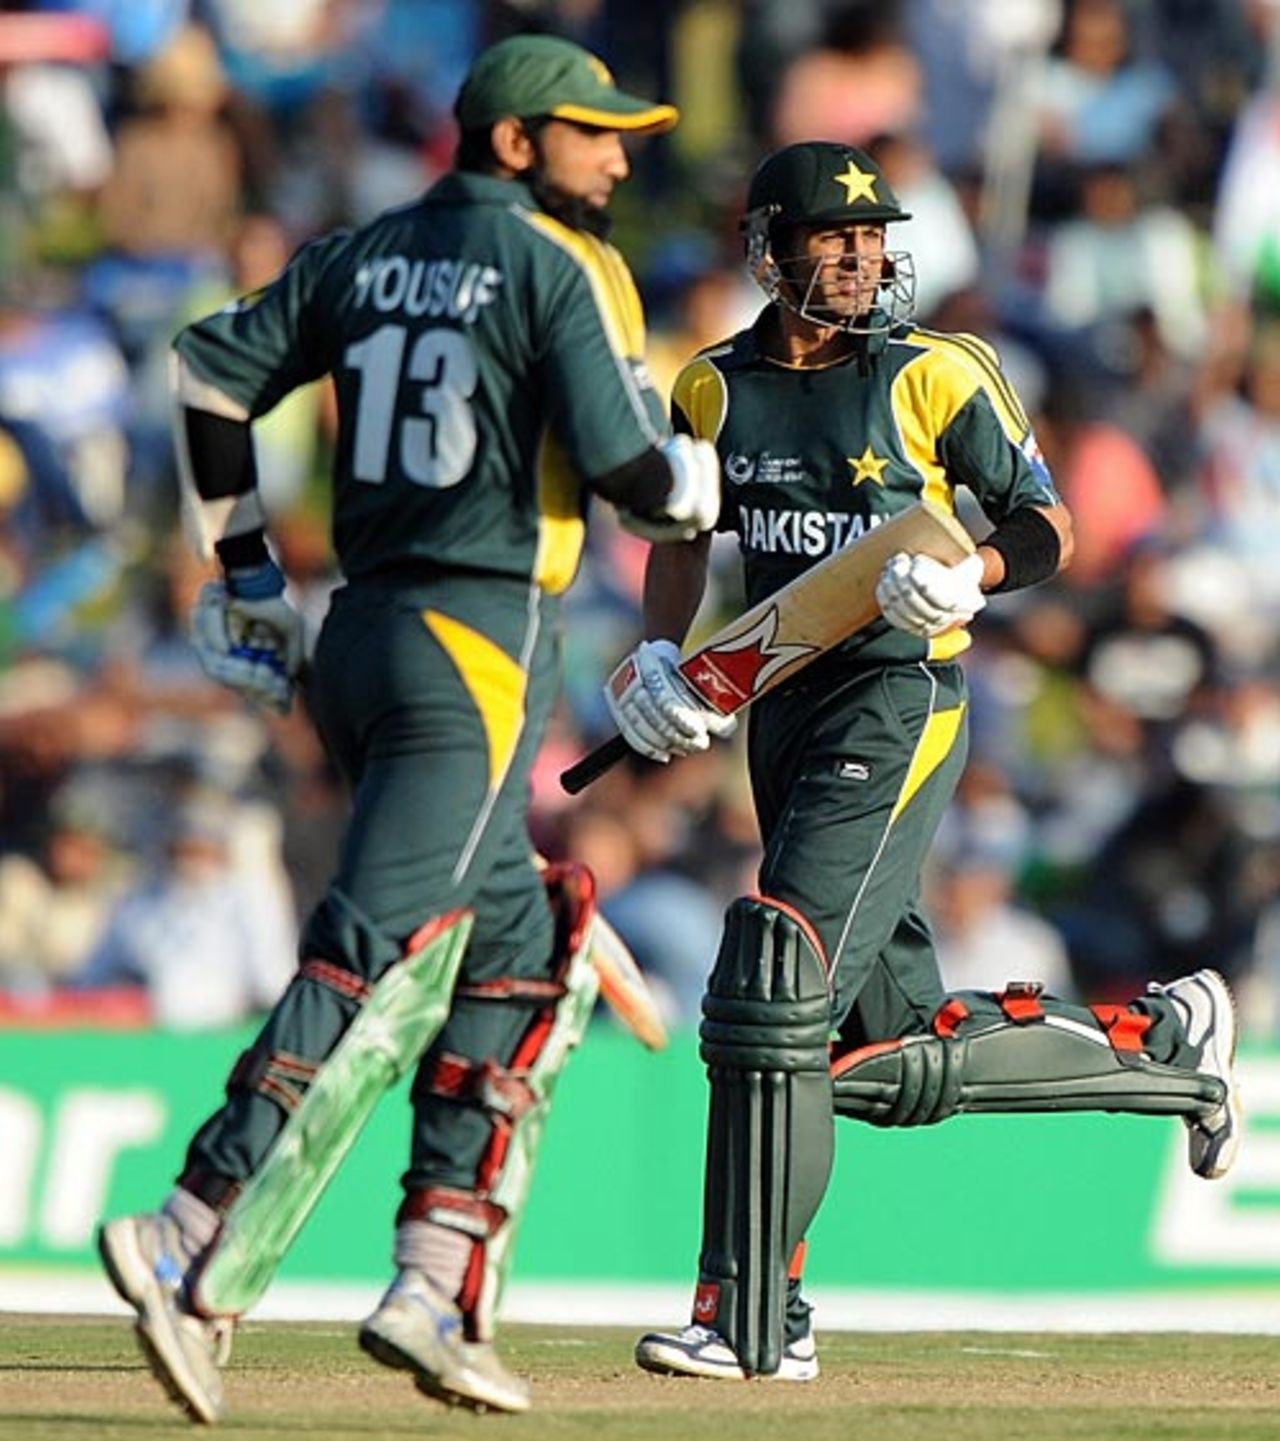 Mohammad Yousuf and Shoaib Malik added 206 for the fourth wicket, India v Pakistan, Champions Trophy, Group A, Centurion, September 26, 2009